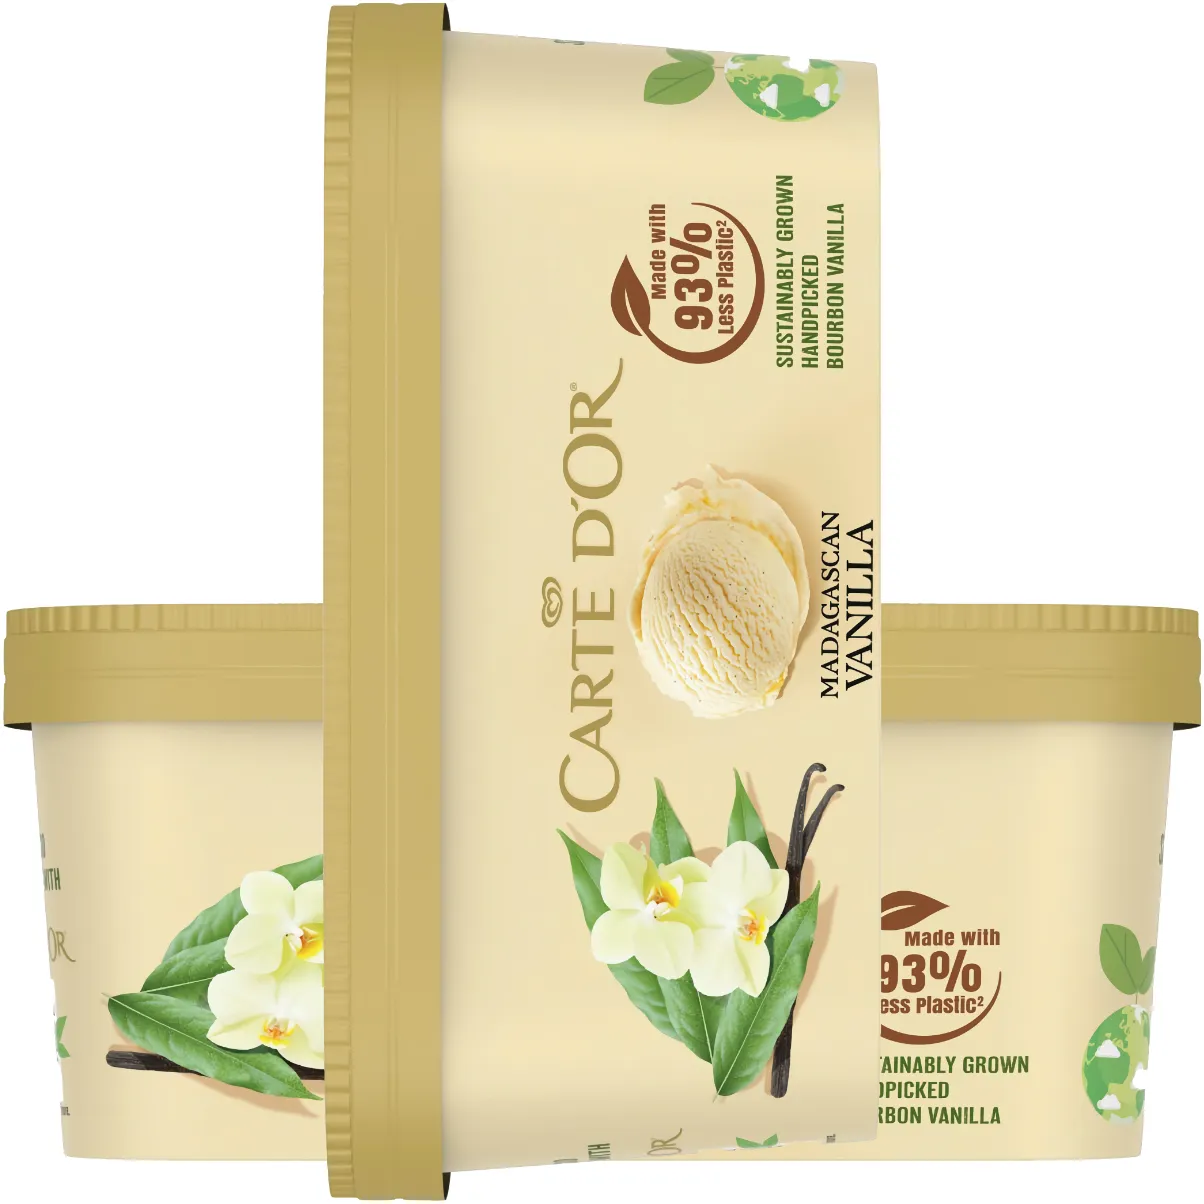 Free Carte D'Or Bourbon Vanilla £1 for Unilever products